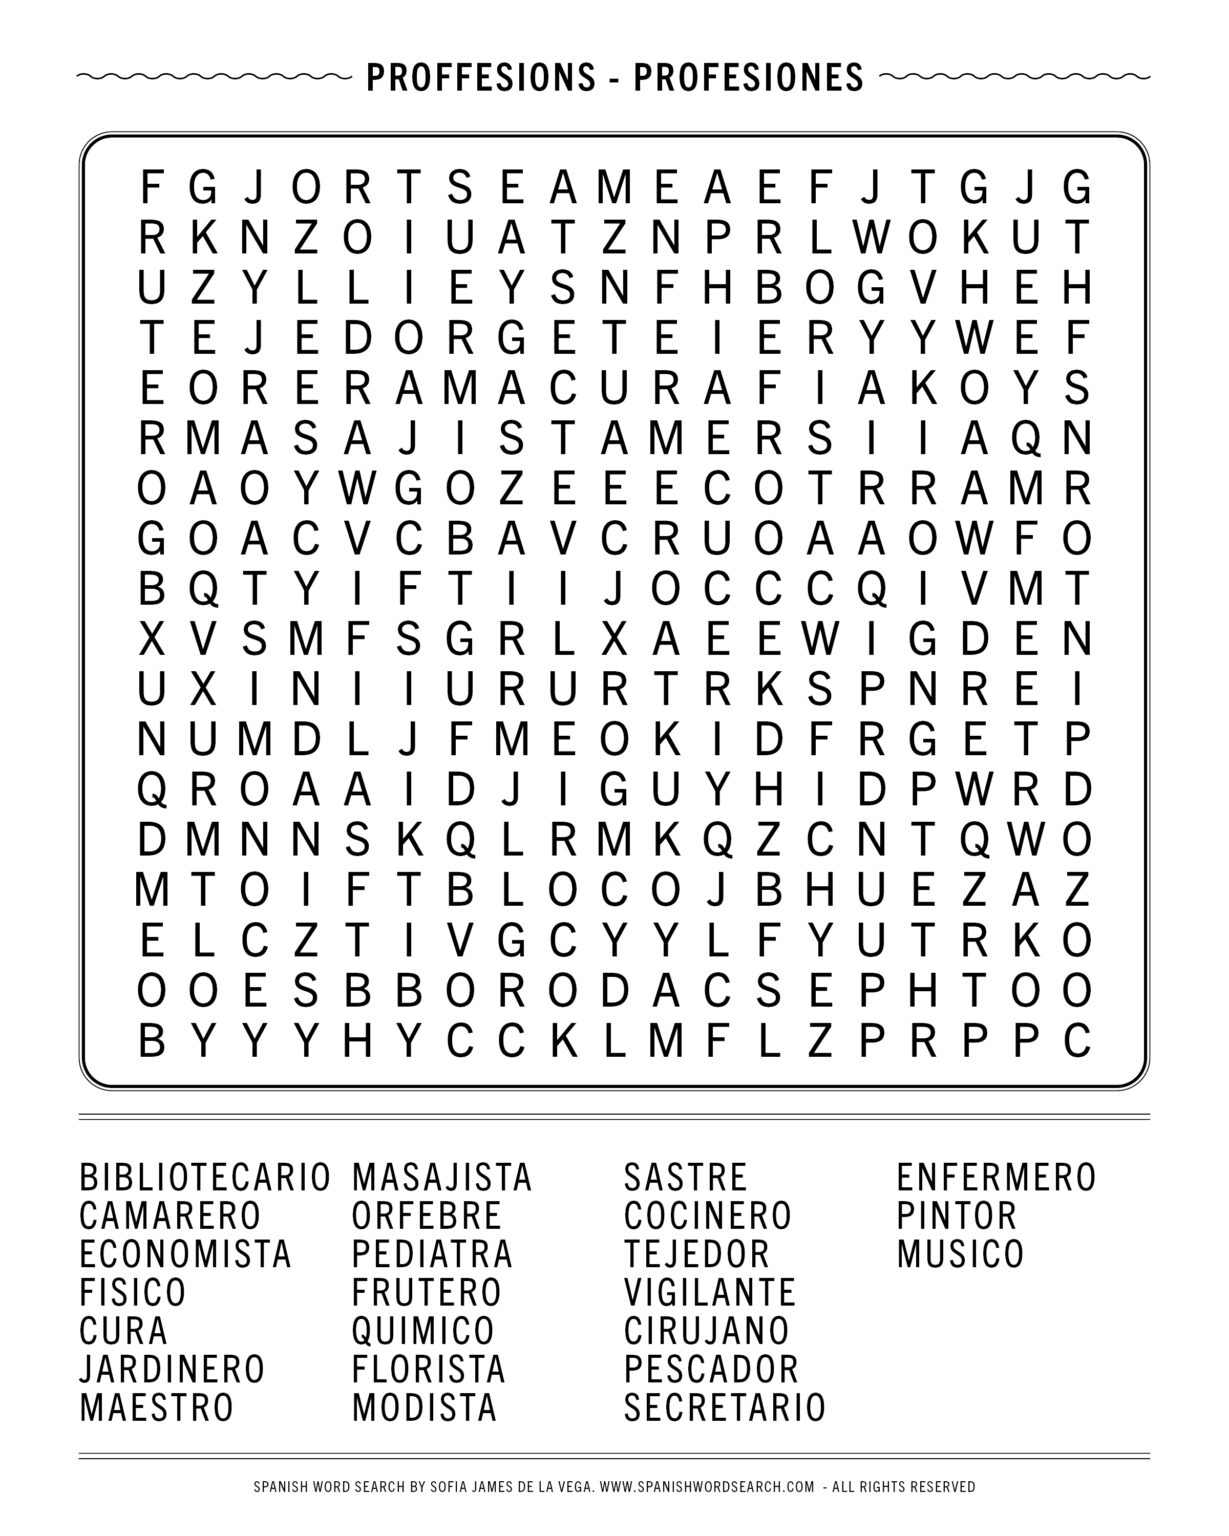 spanish-word-search-about-proffesions-puzzle-with-jobs-in-spanish